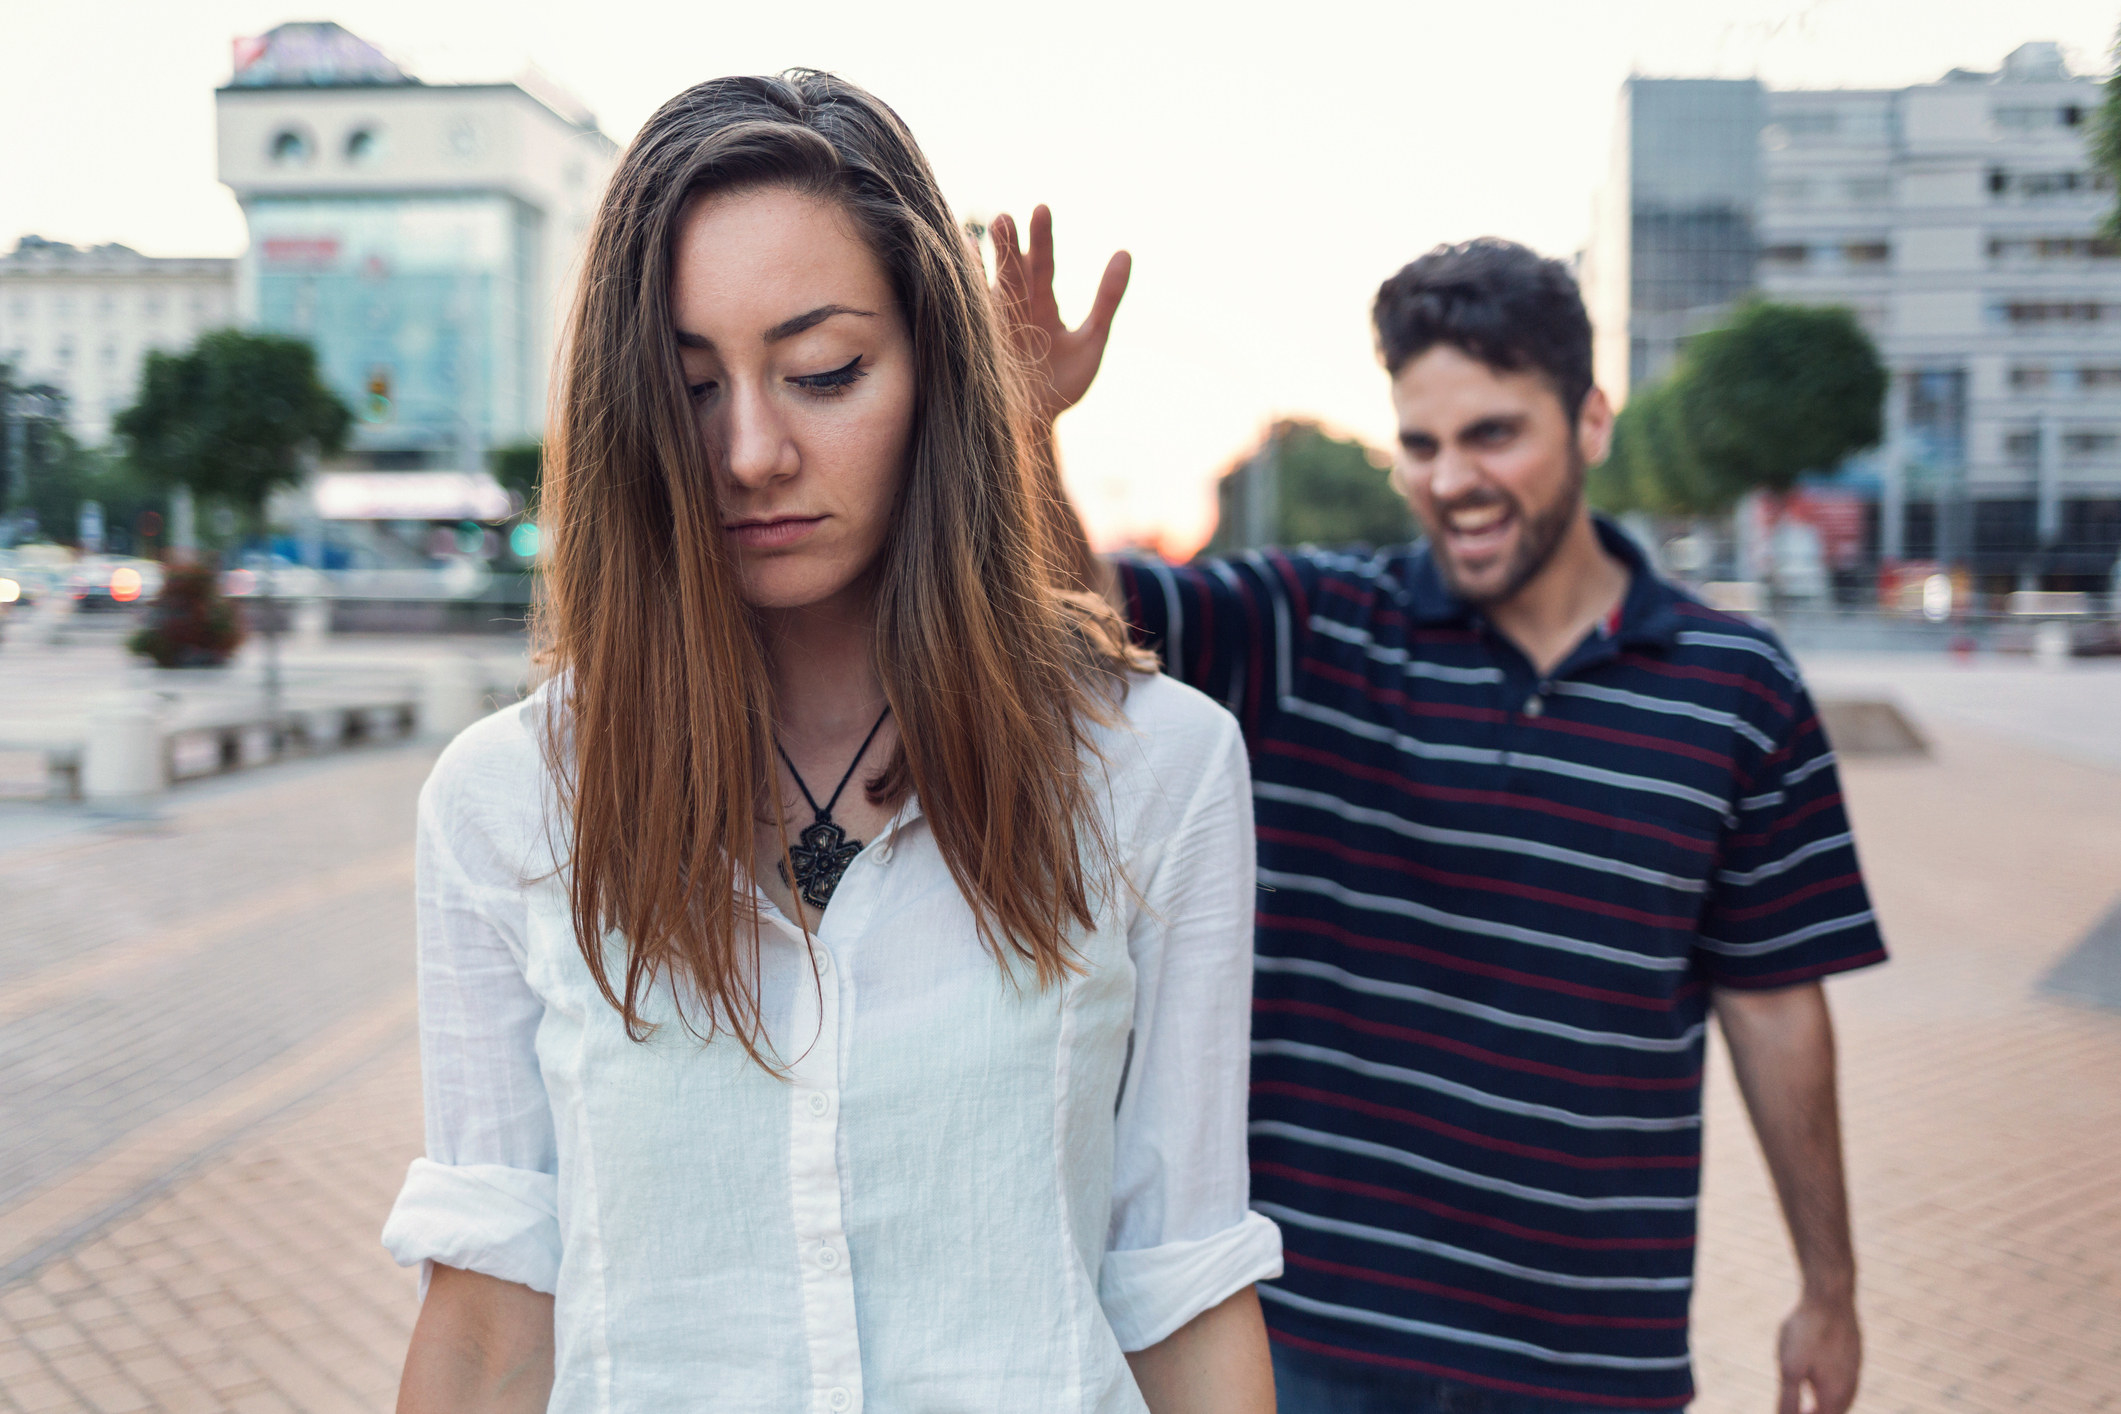 a woman being harassed on the street by a shouting man